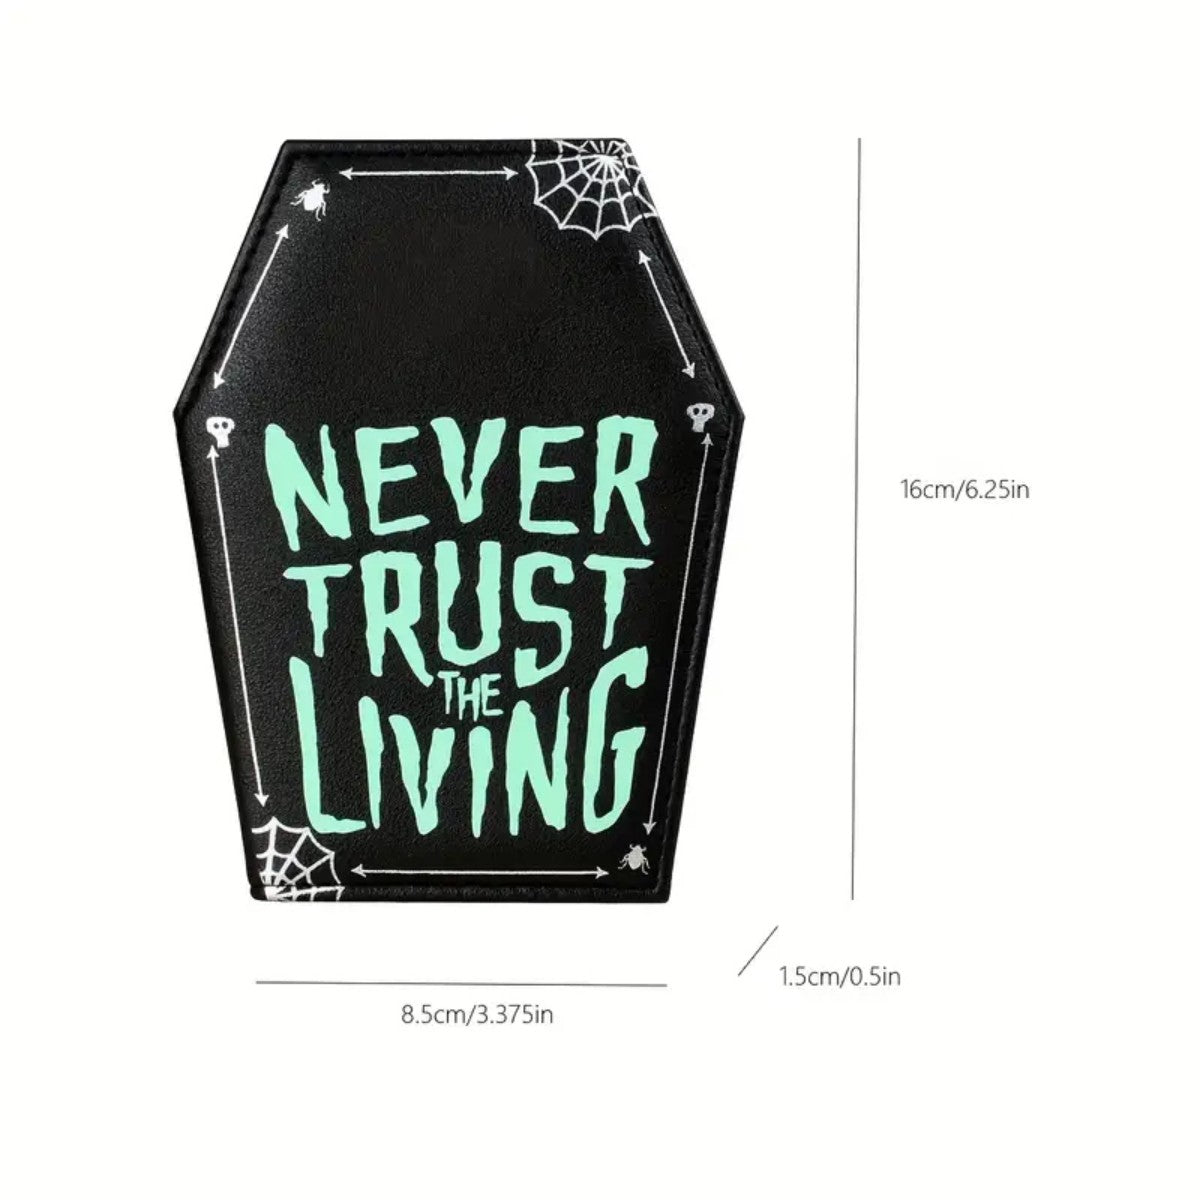 Never Trust The Living Glow in the Dark Coffin Wallet